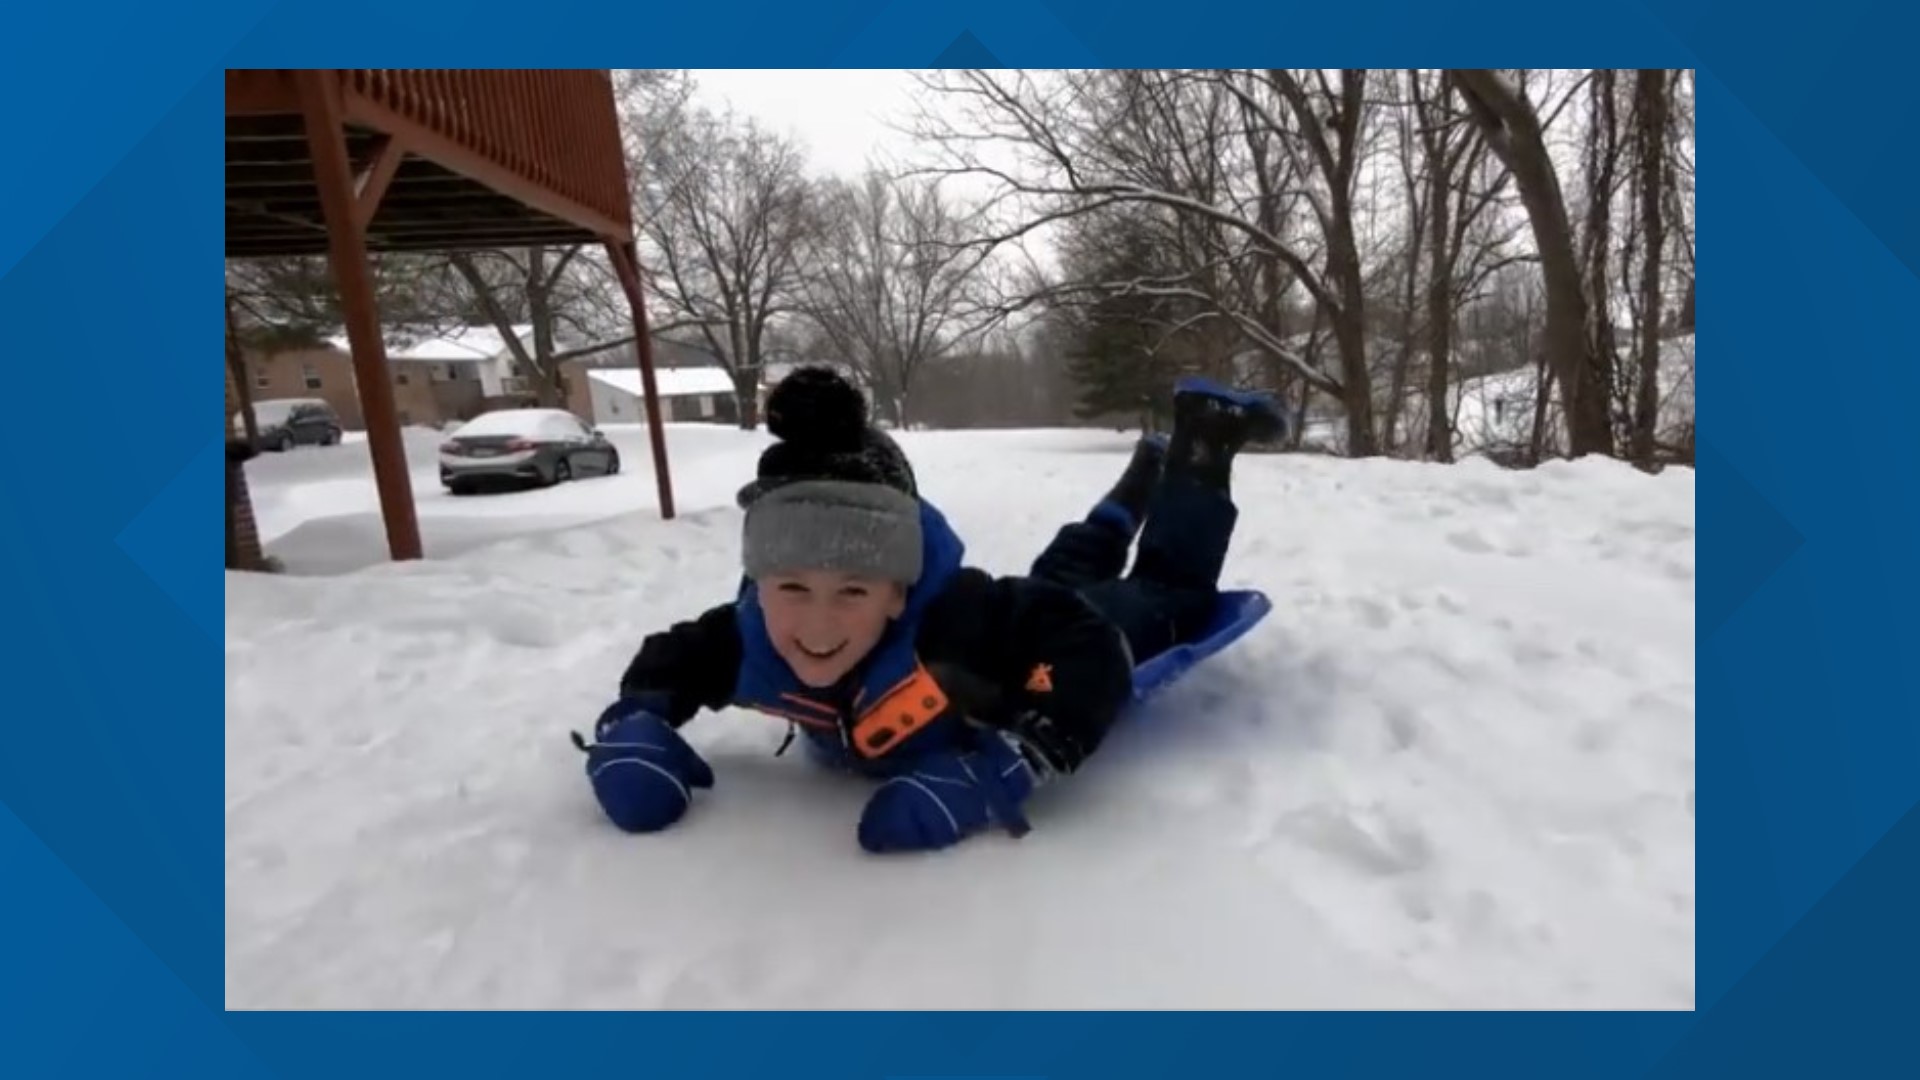 When a local dad posted a plea for help to get his son a sled, the community responded in a big way.